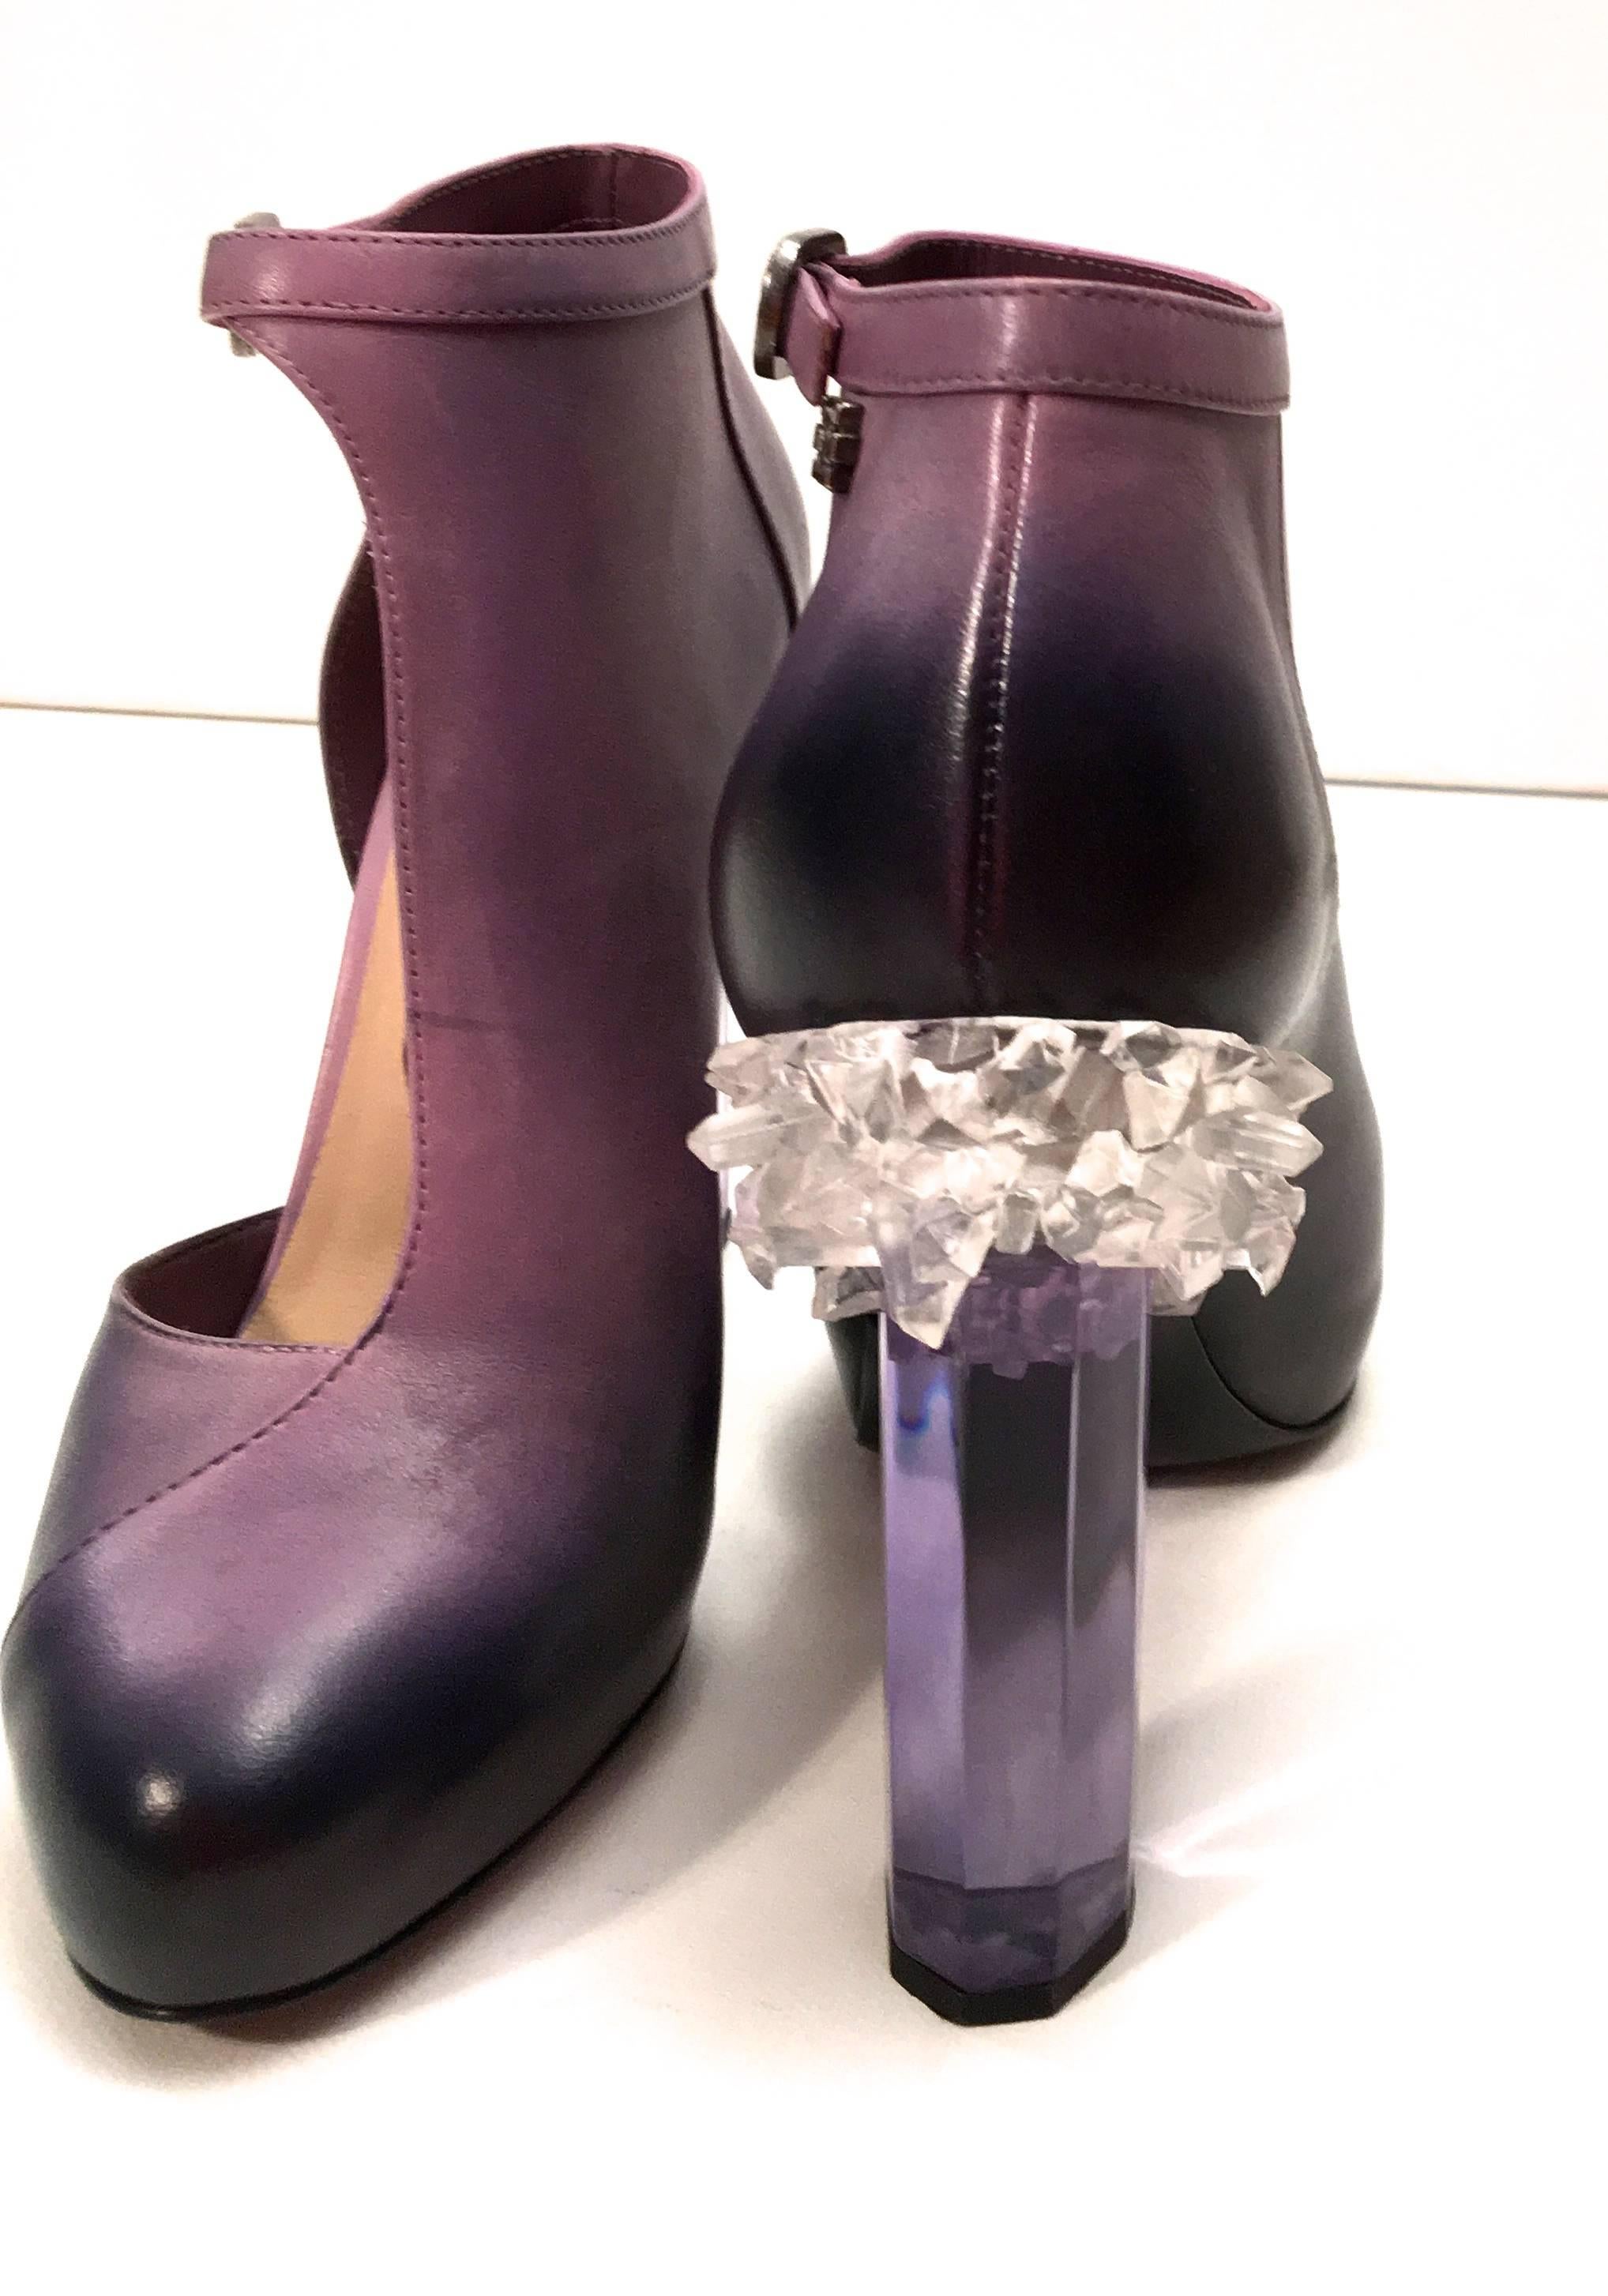 Rare Chanel Runway Boots - Purple and Black - Lucite Heels - Size 38 1